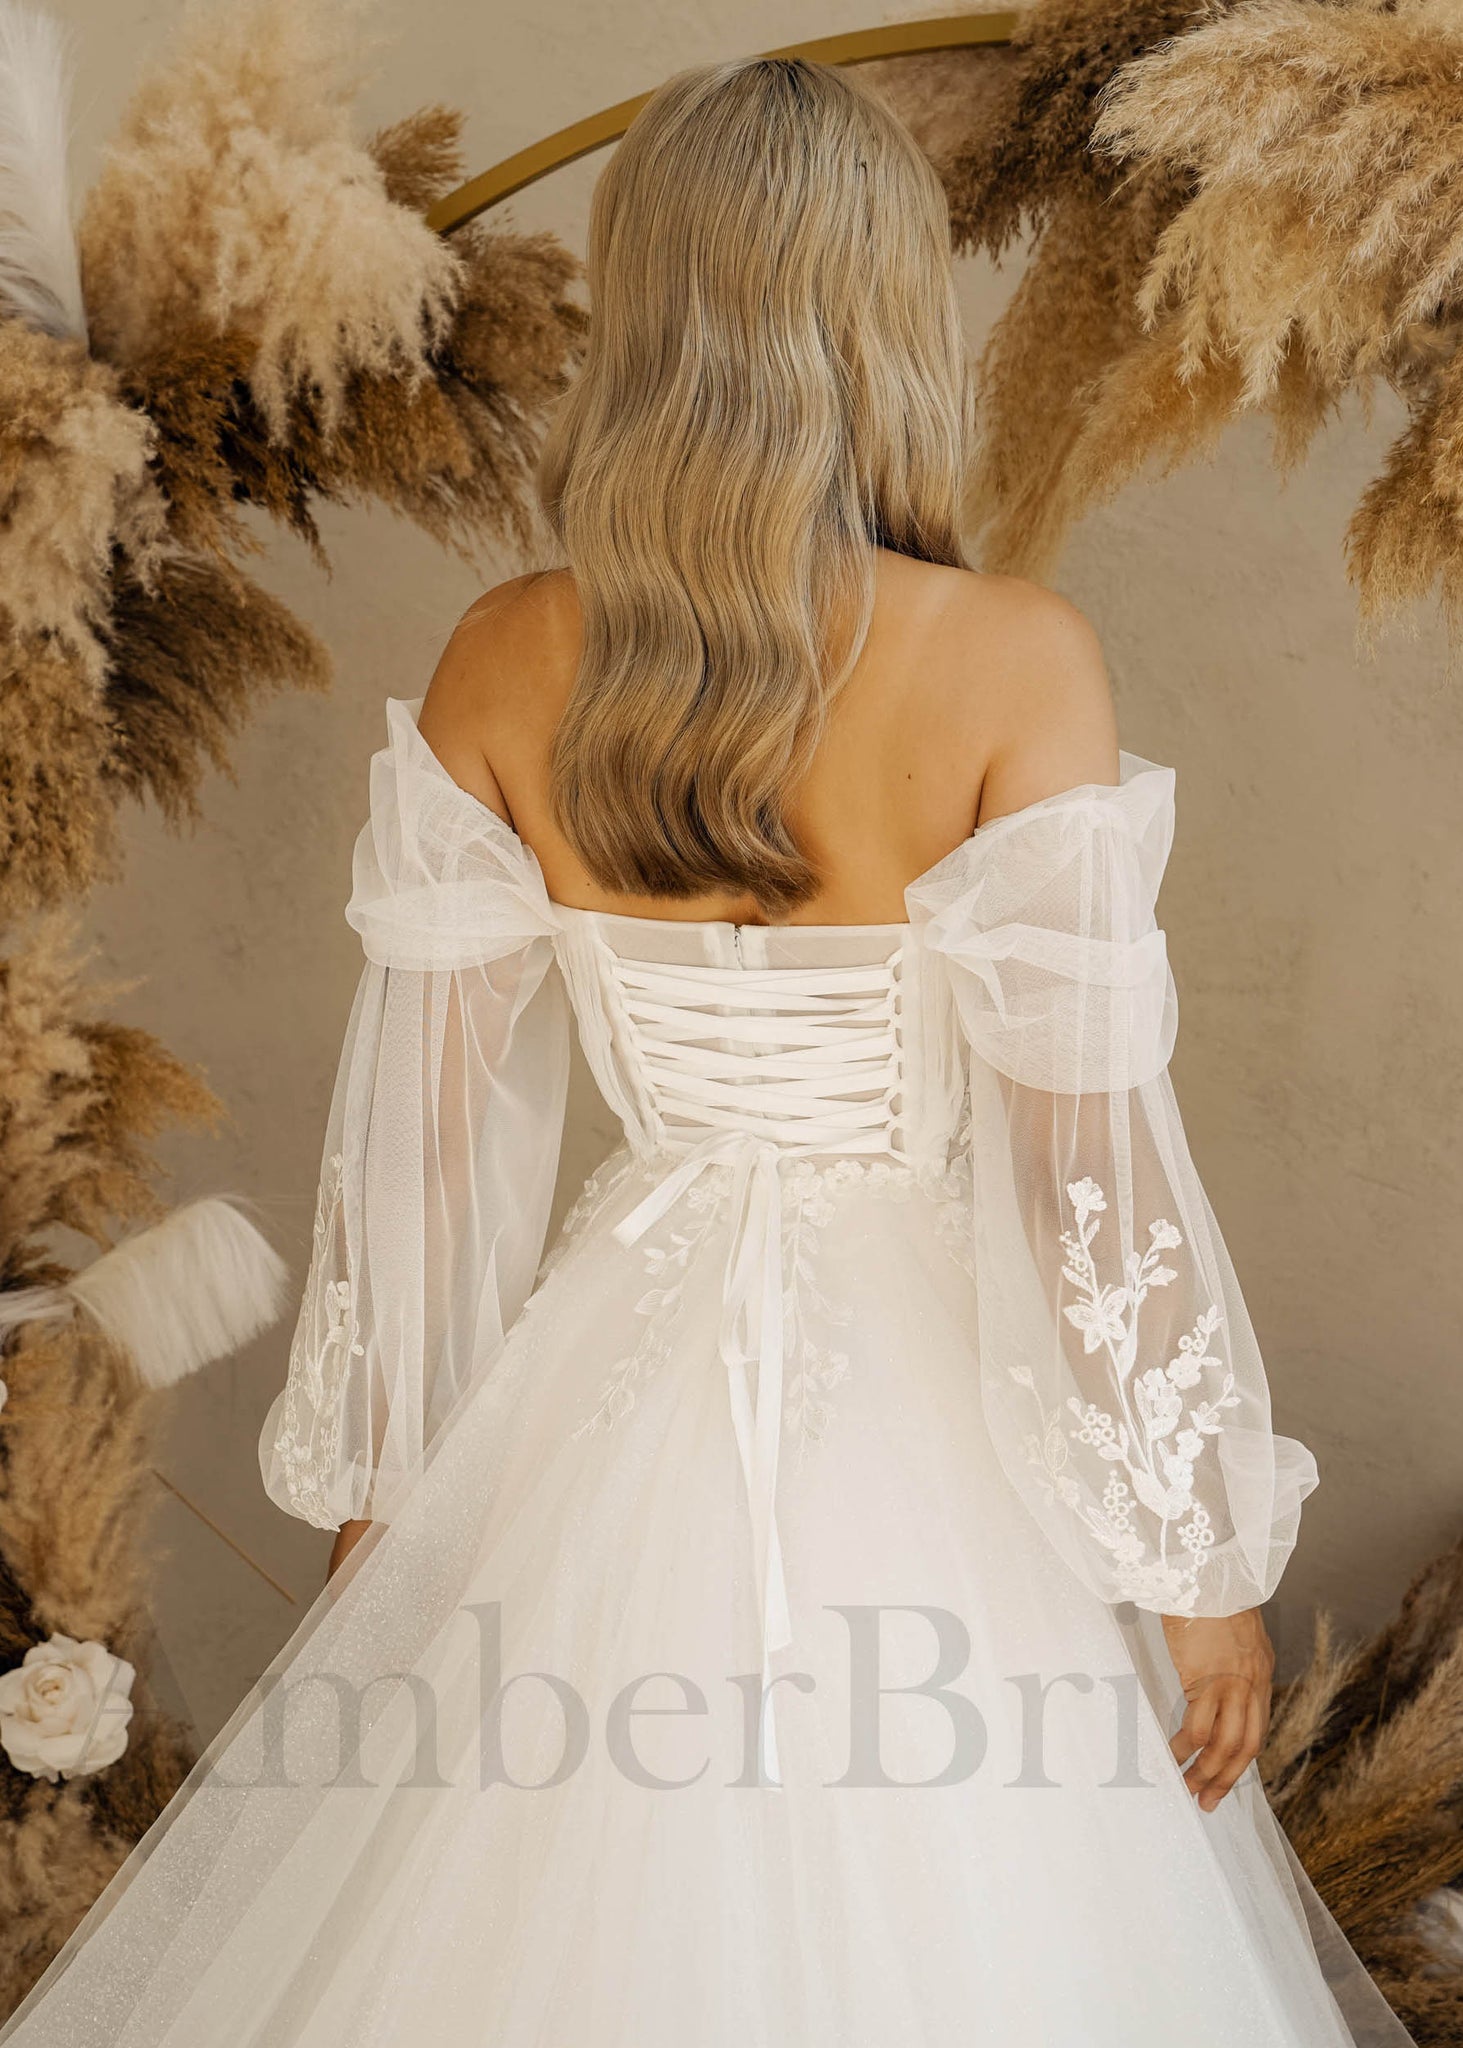 Boho A Line Floral Wedding Dress with Long Puffy Sleeves and Deep V-Neck